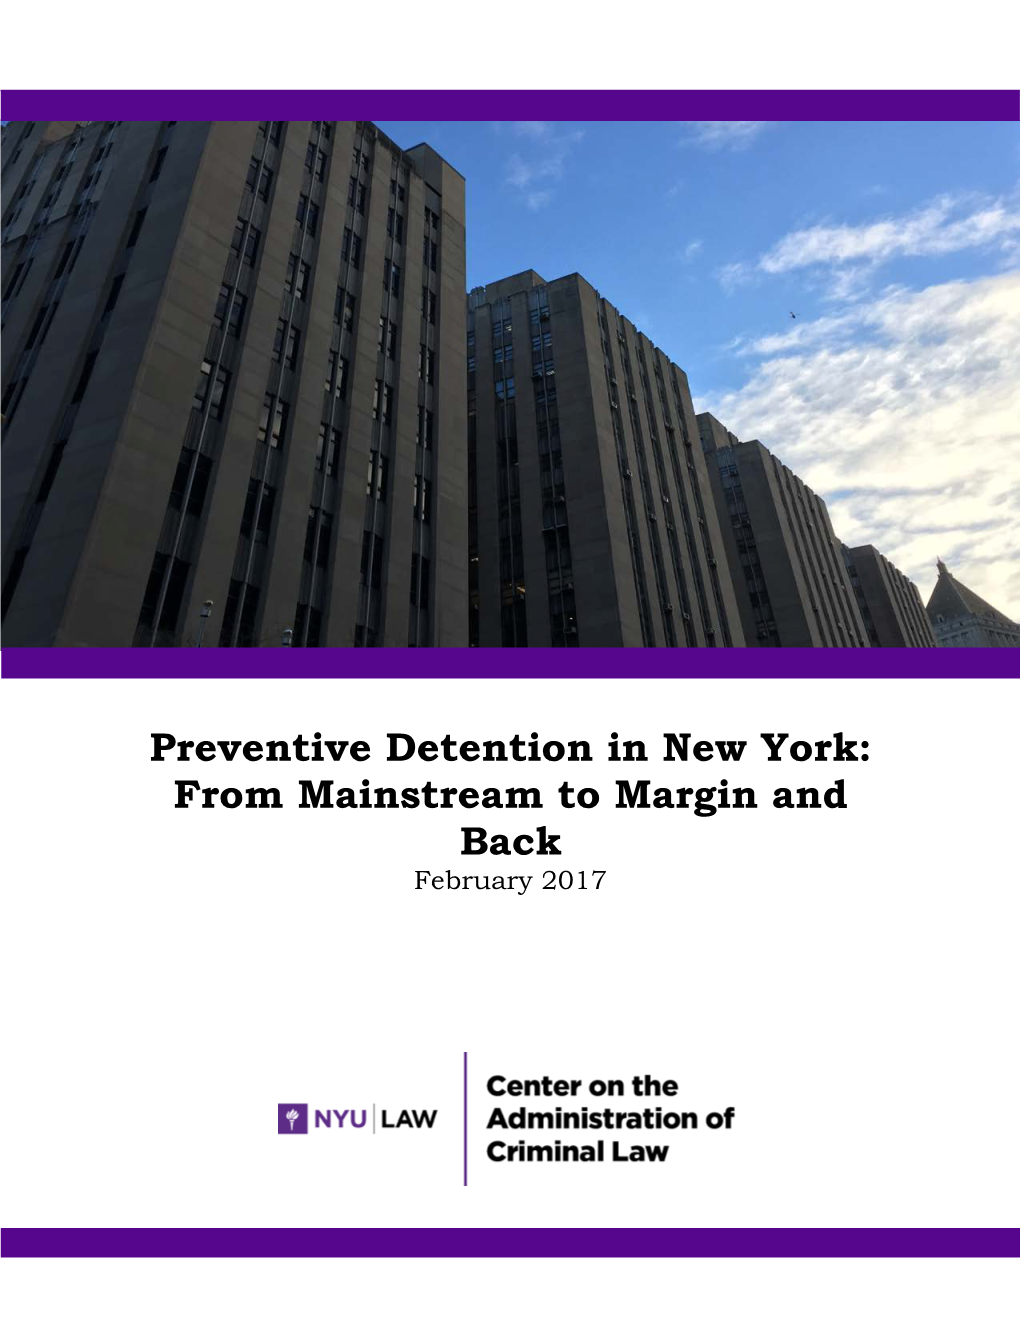 Preventive Detention in New York: from Mainstream to Margin and Back February 2017